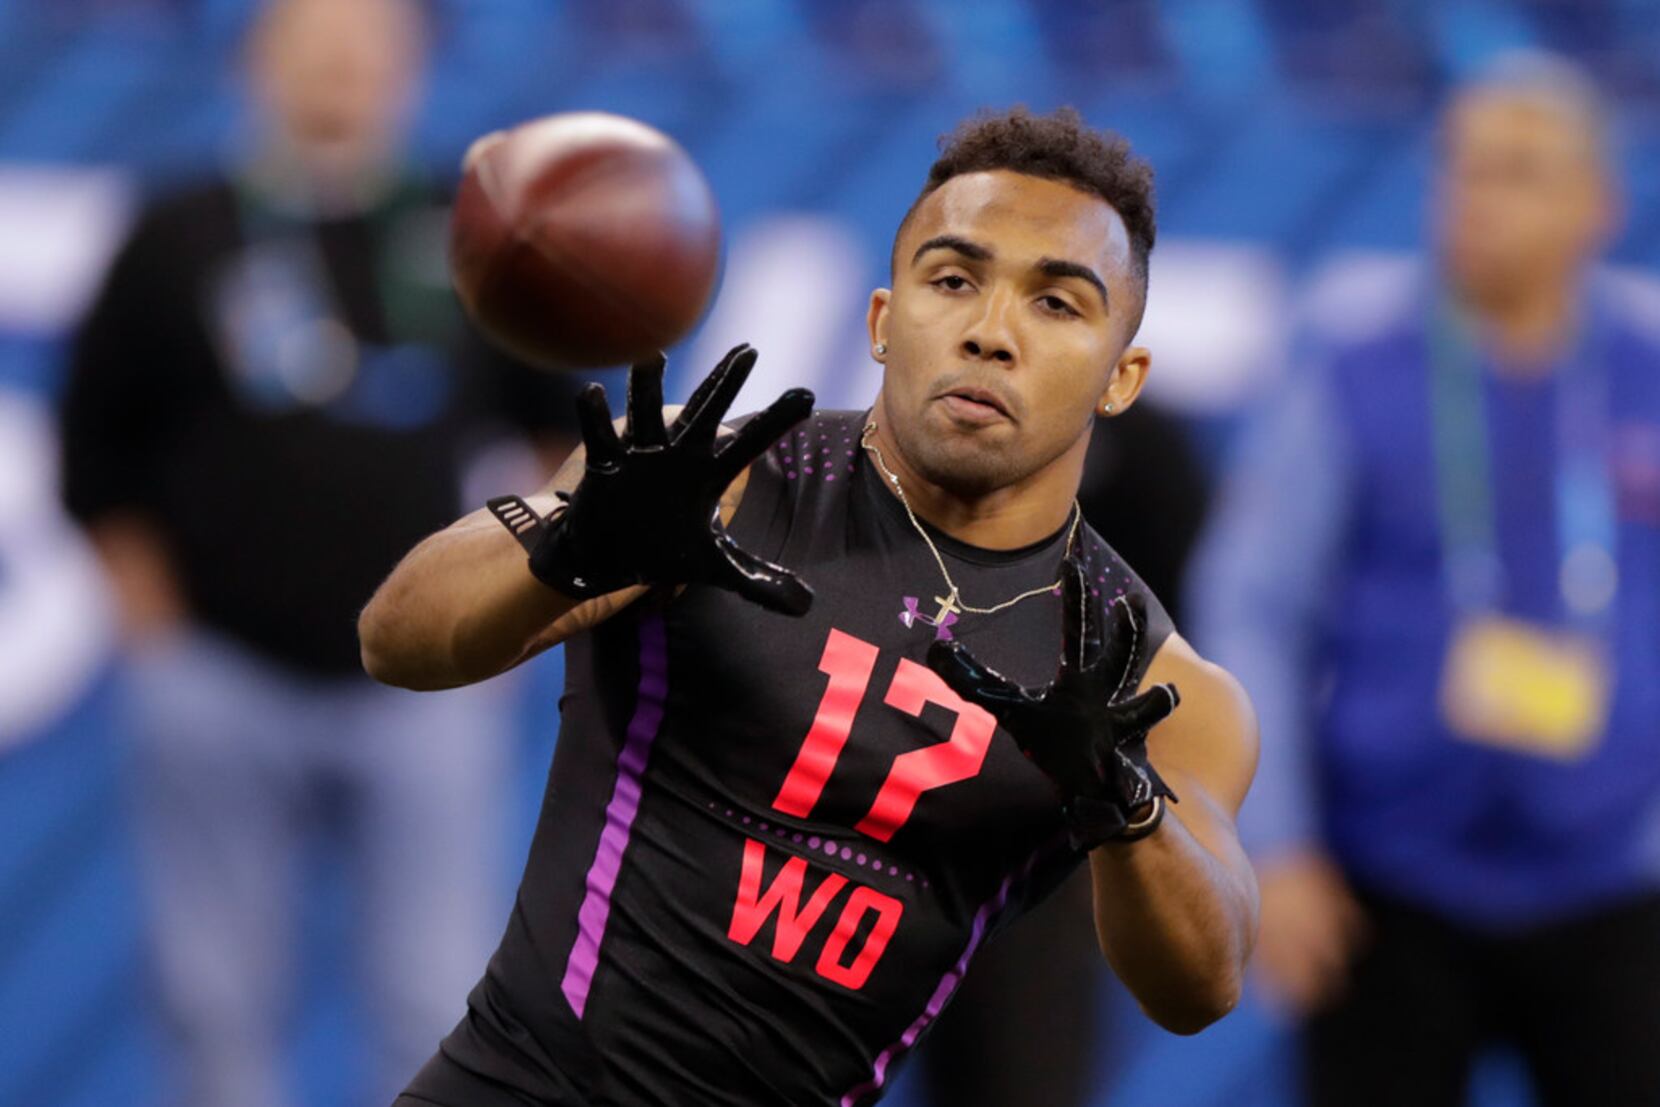 Christian Kirk says he doesn't play football to be average